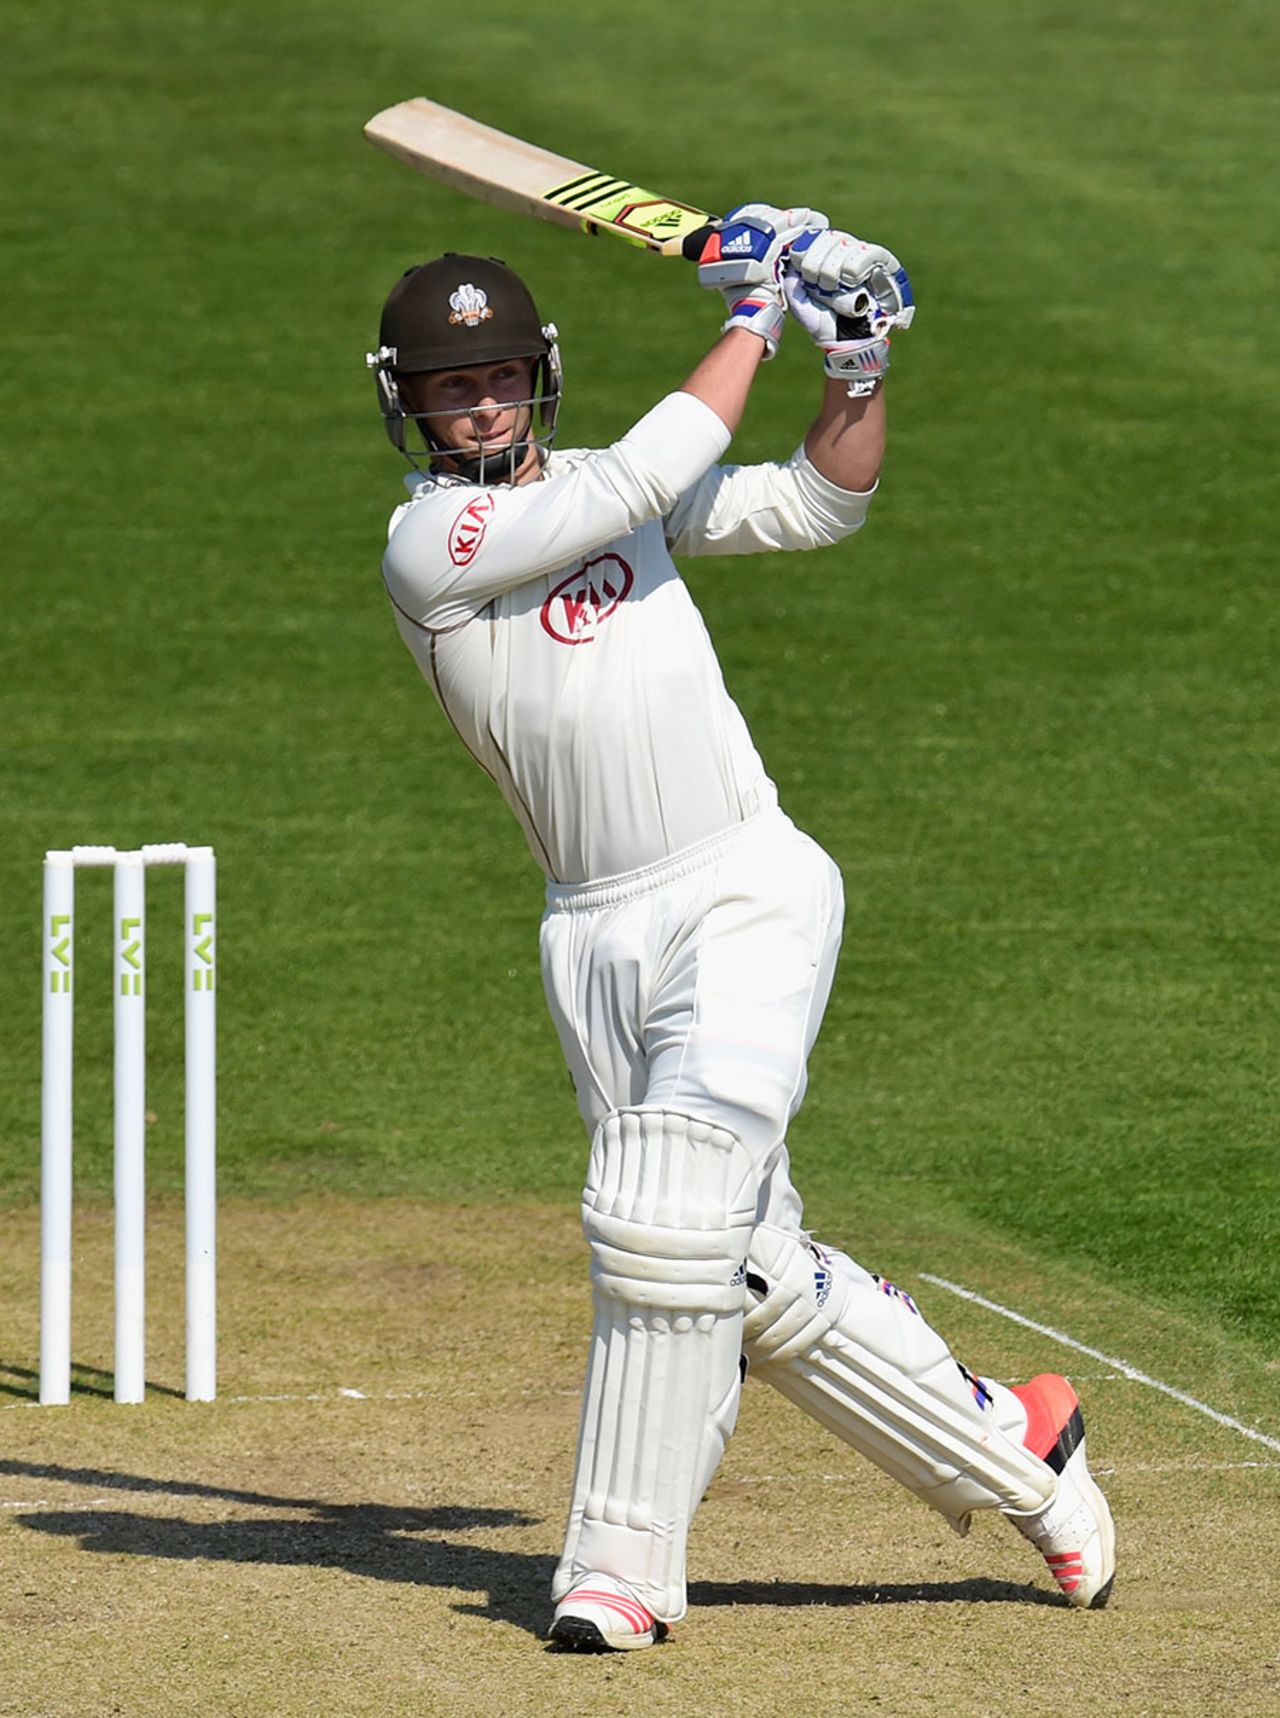 Tom Curran helped himself to 23 not out before Surrey declared, Glamorgan v Surrey, County Championship Division One, Cardiff, 2nd day, April 20, 2015